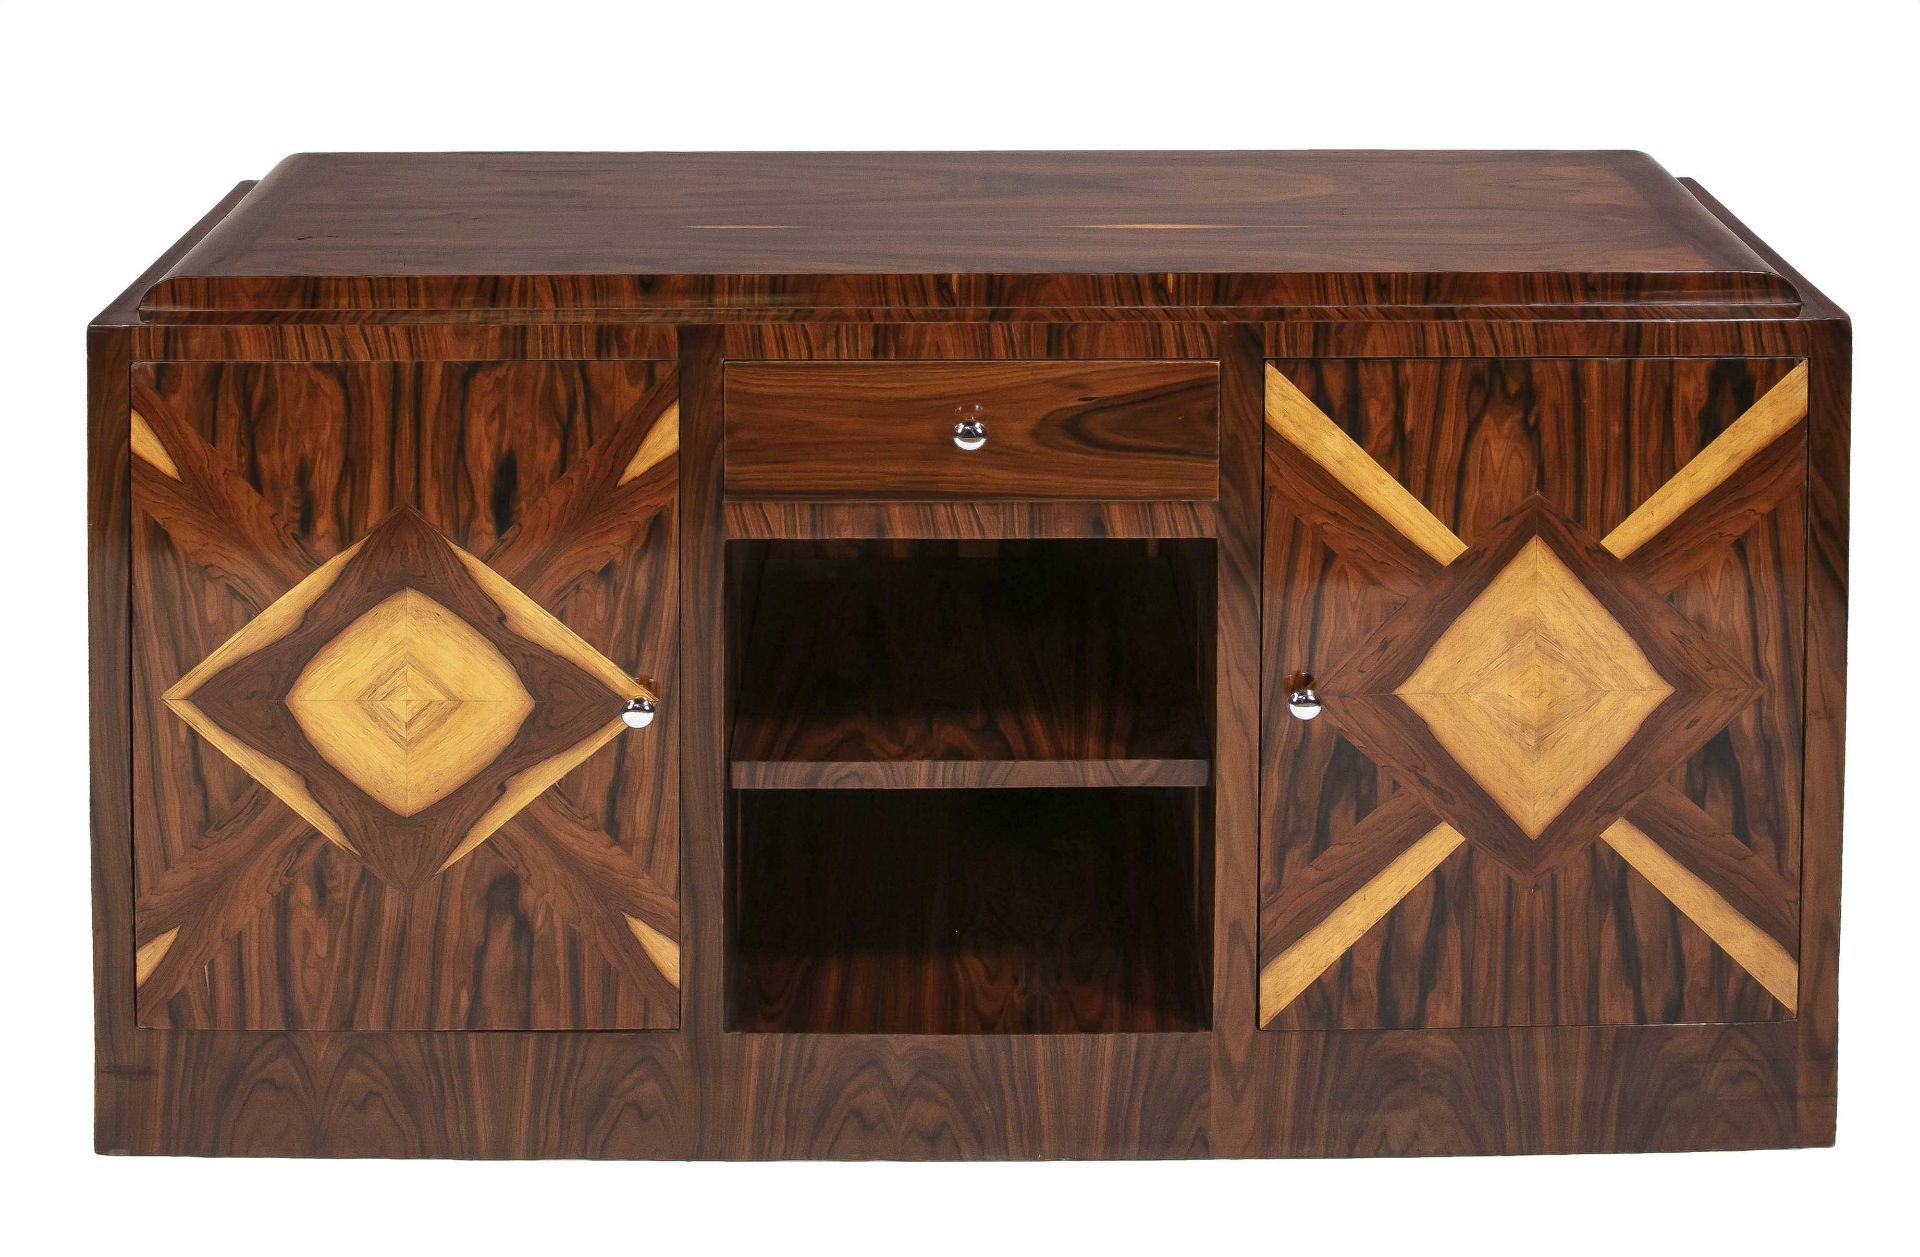 Sideboard in art deco style, end of 20th century, Indian 2-color rosewood veneer, 82,5 x 151 x 45 - Image 3 of 3